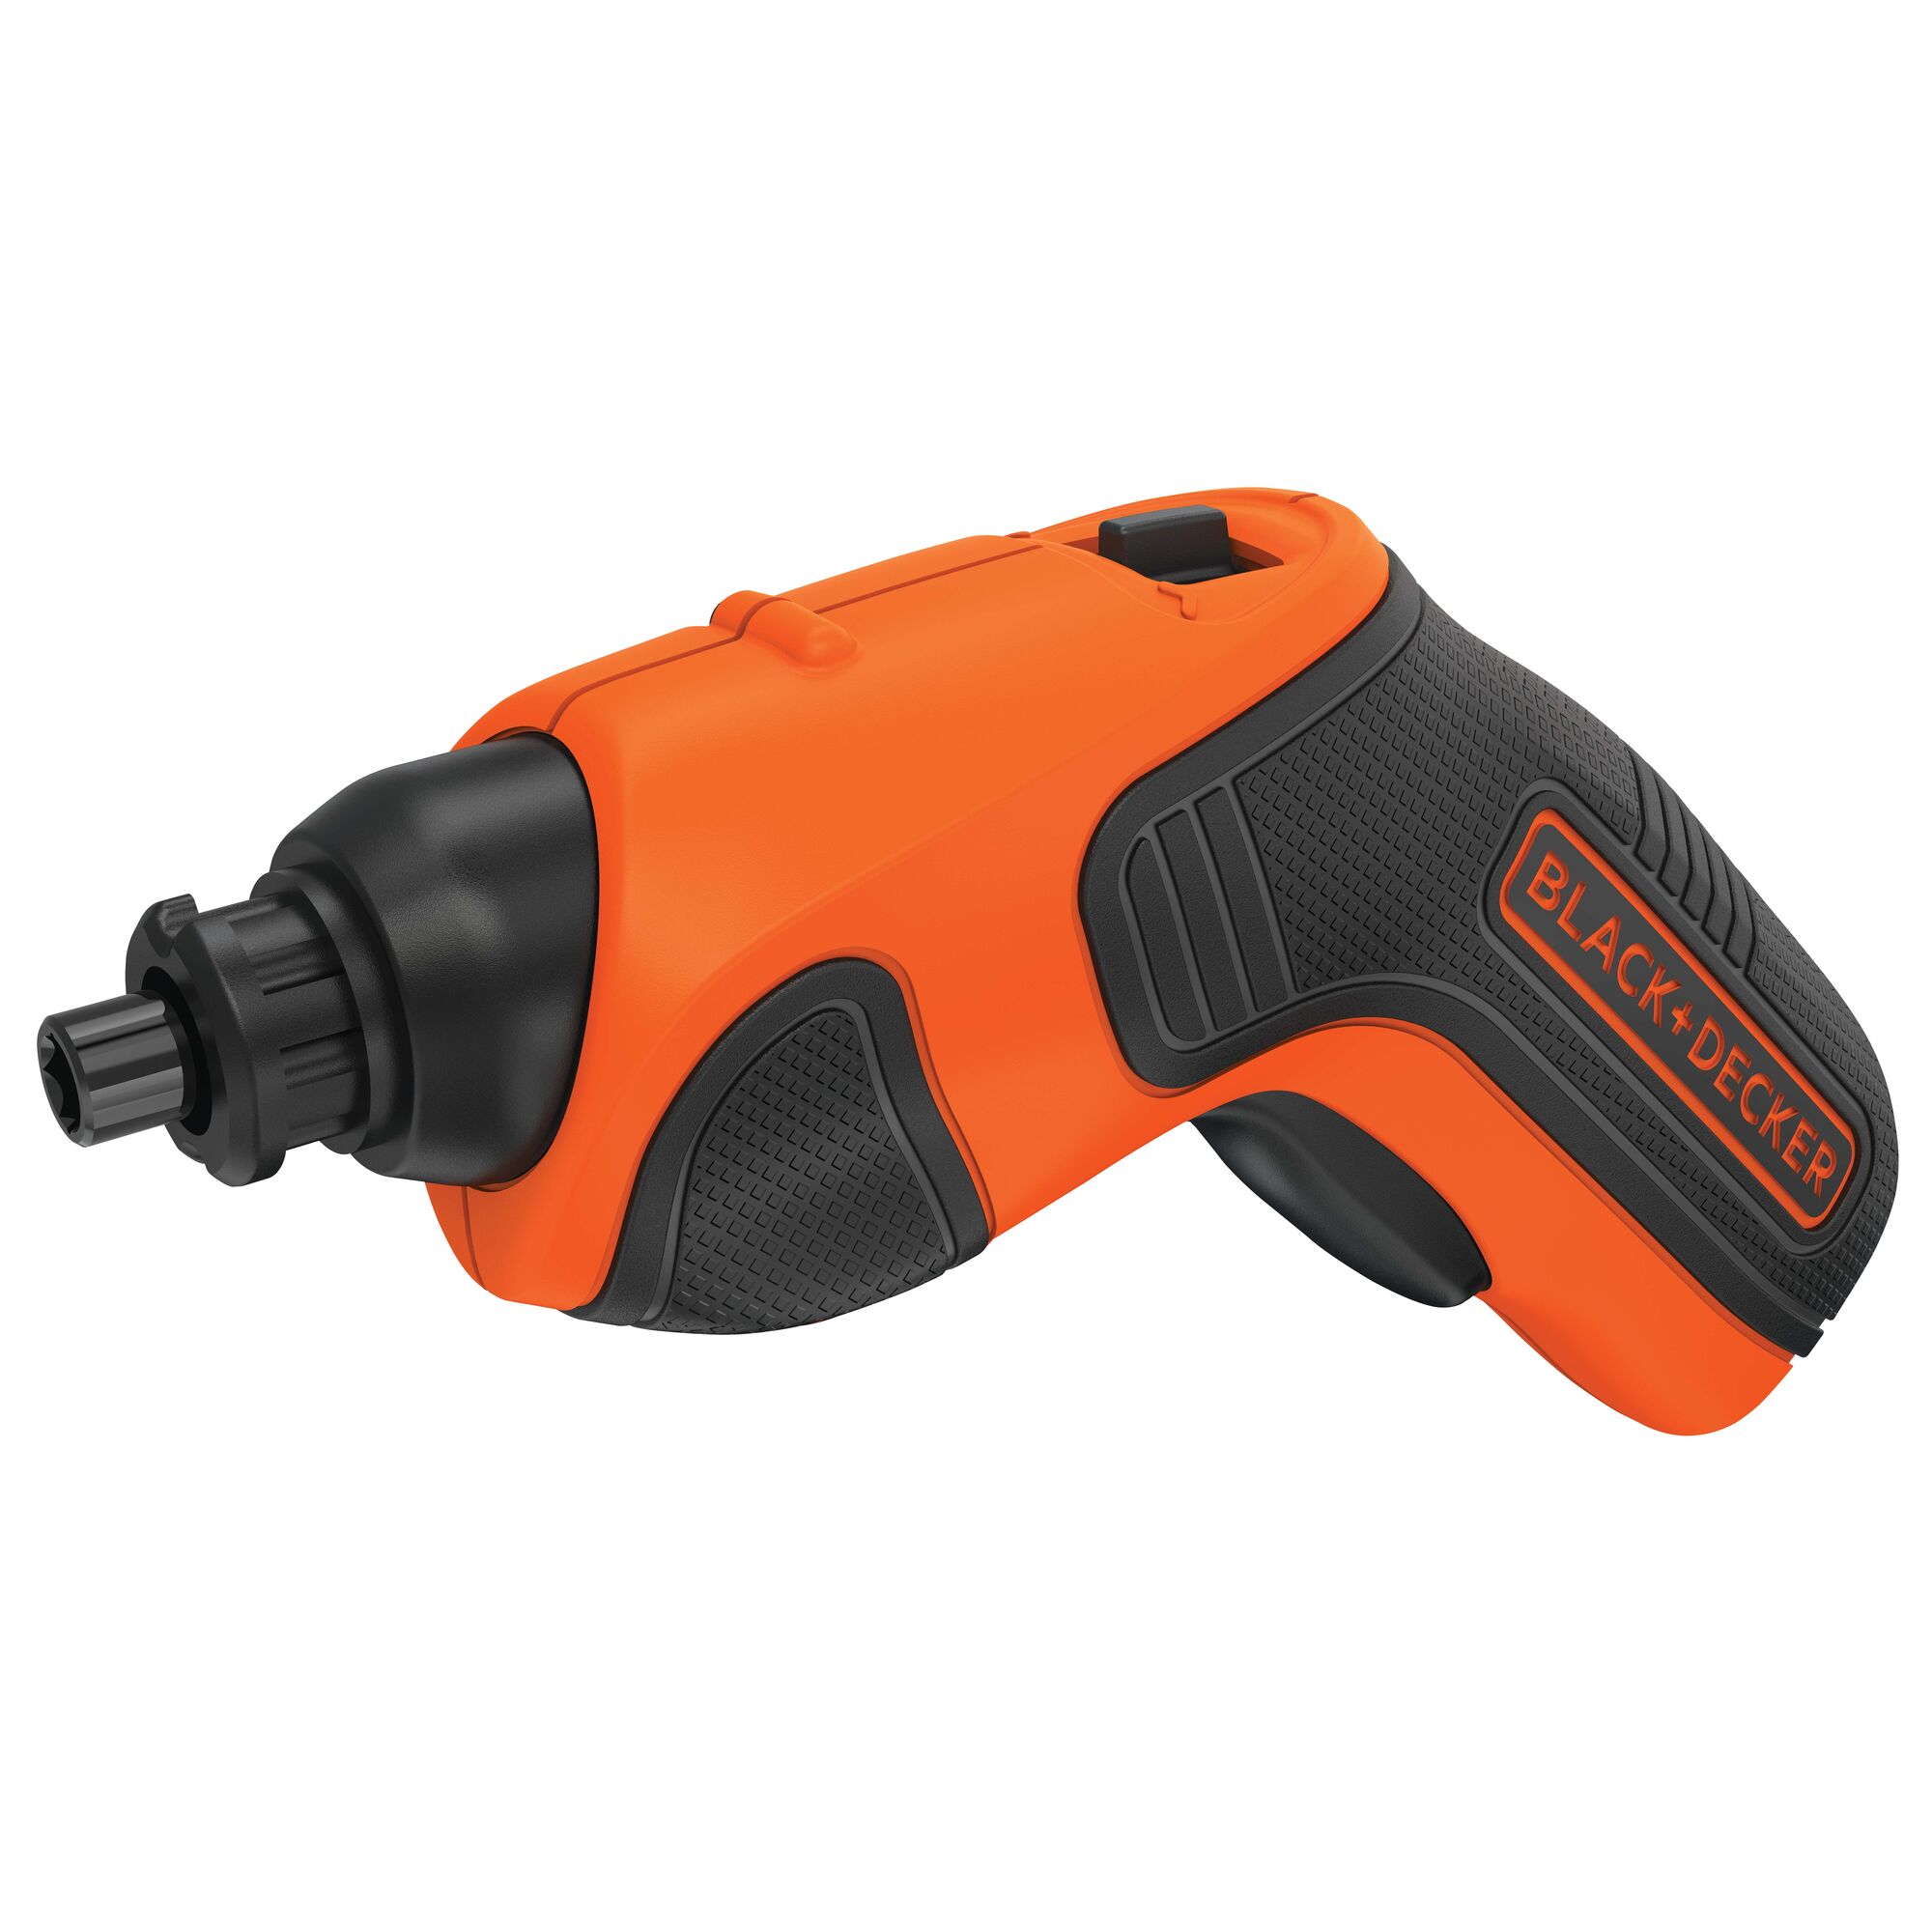 Profile of 4 volt max lithium rechargeable screwdriver.